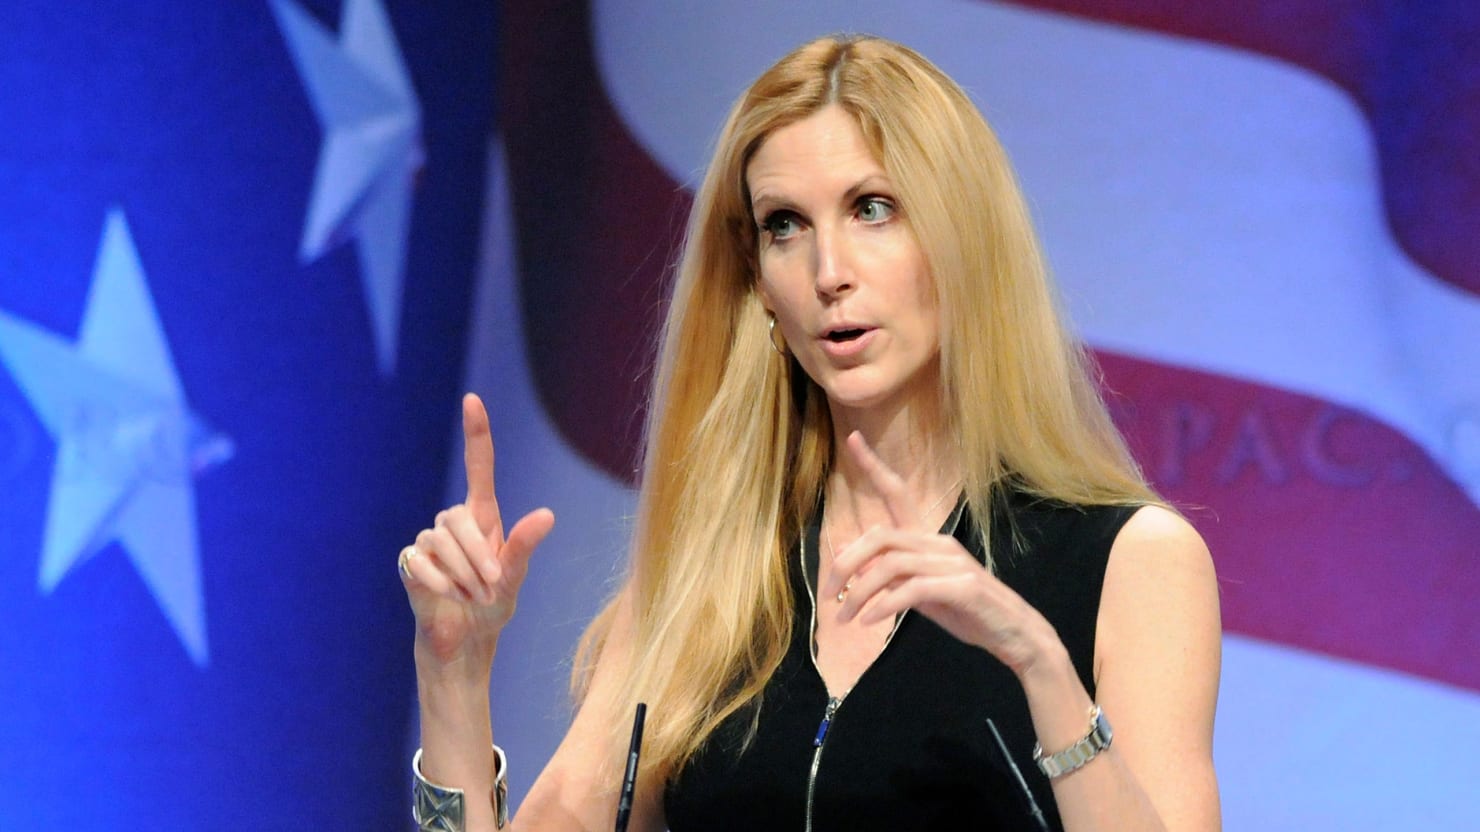 UC Berkeley Faces Lawsuit Over Canceled Ann Coulter Speech